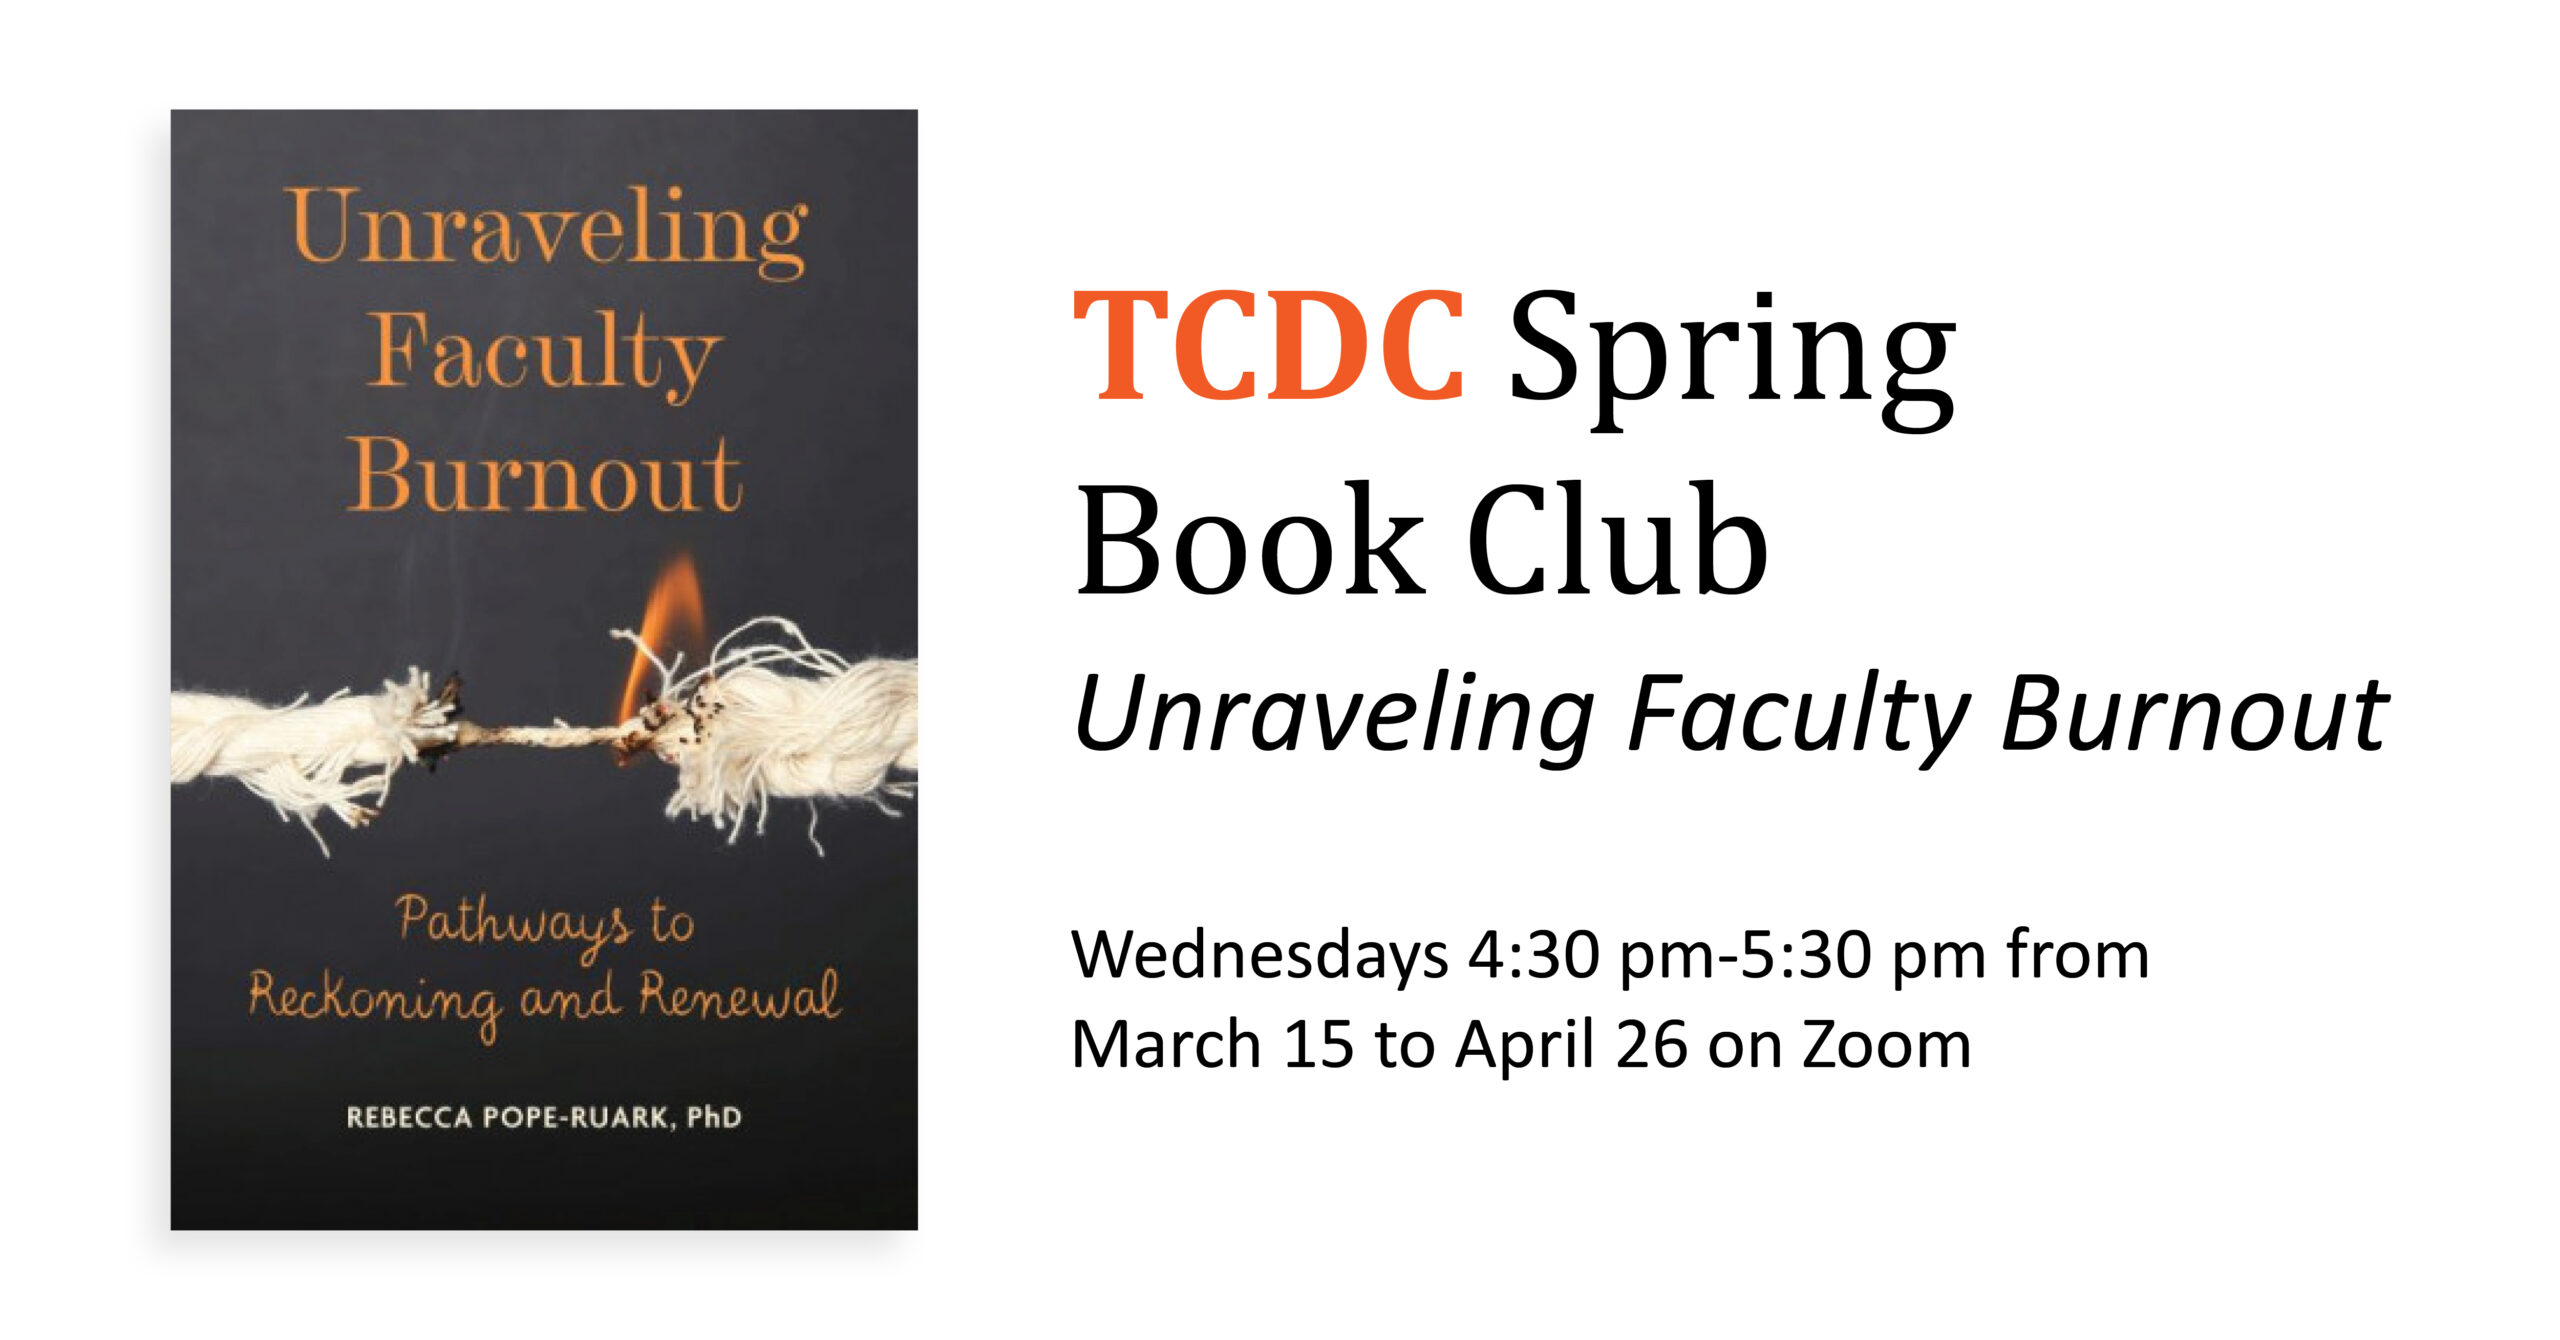 The book cover for Unraveling Faculty Burnout, which has a dark background and shows a rope that is almost completely pulled apart, with a small flame burning in the centre. The text reads “TCDC Spring Book Club: Unraveling Faculty Burnout. Wednesdays 4:30 pm-5:30 pm from March 15 to April 26 on Zoom.